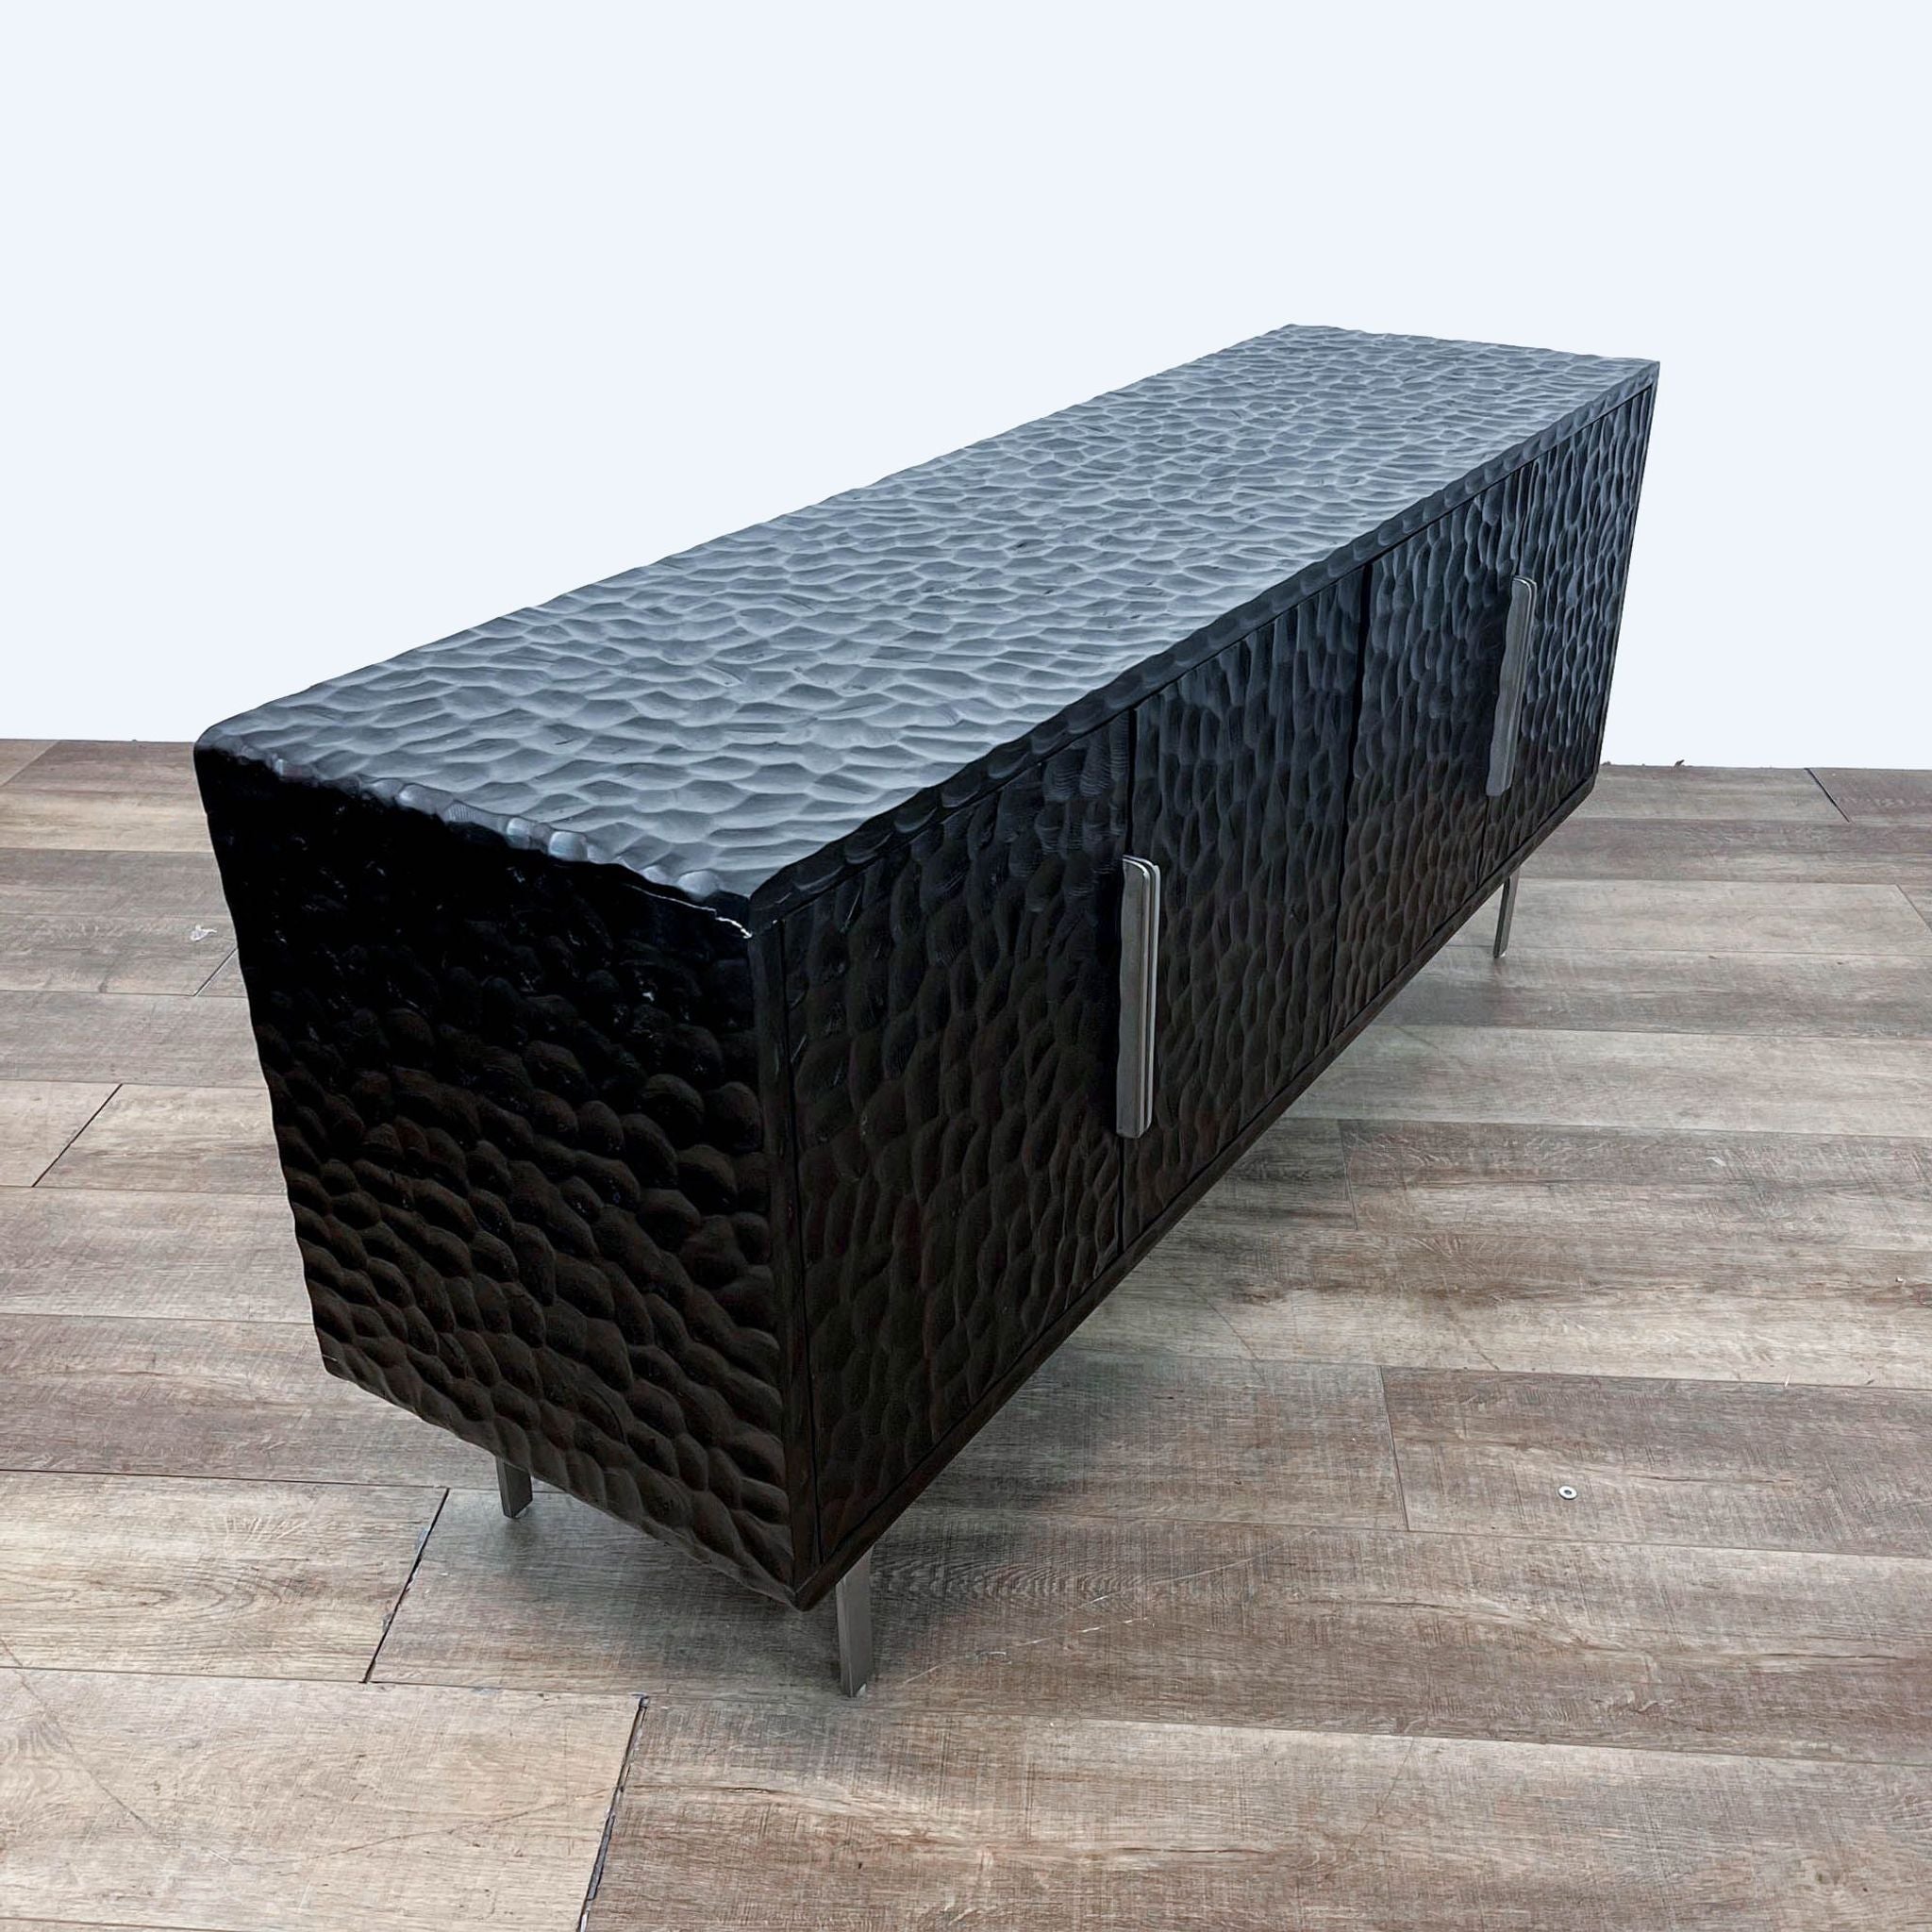 Blackened mango wood credenza with hand-carved moulded effect by Mermelada Estudio on a stainless steel base for CB2, with cord management.